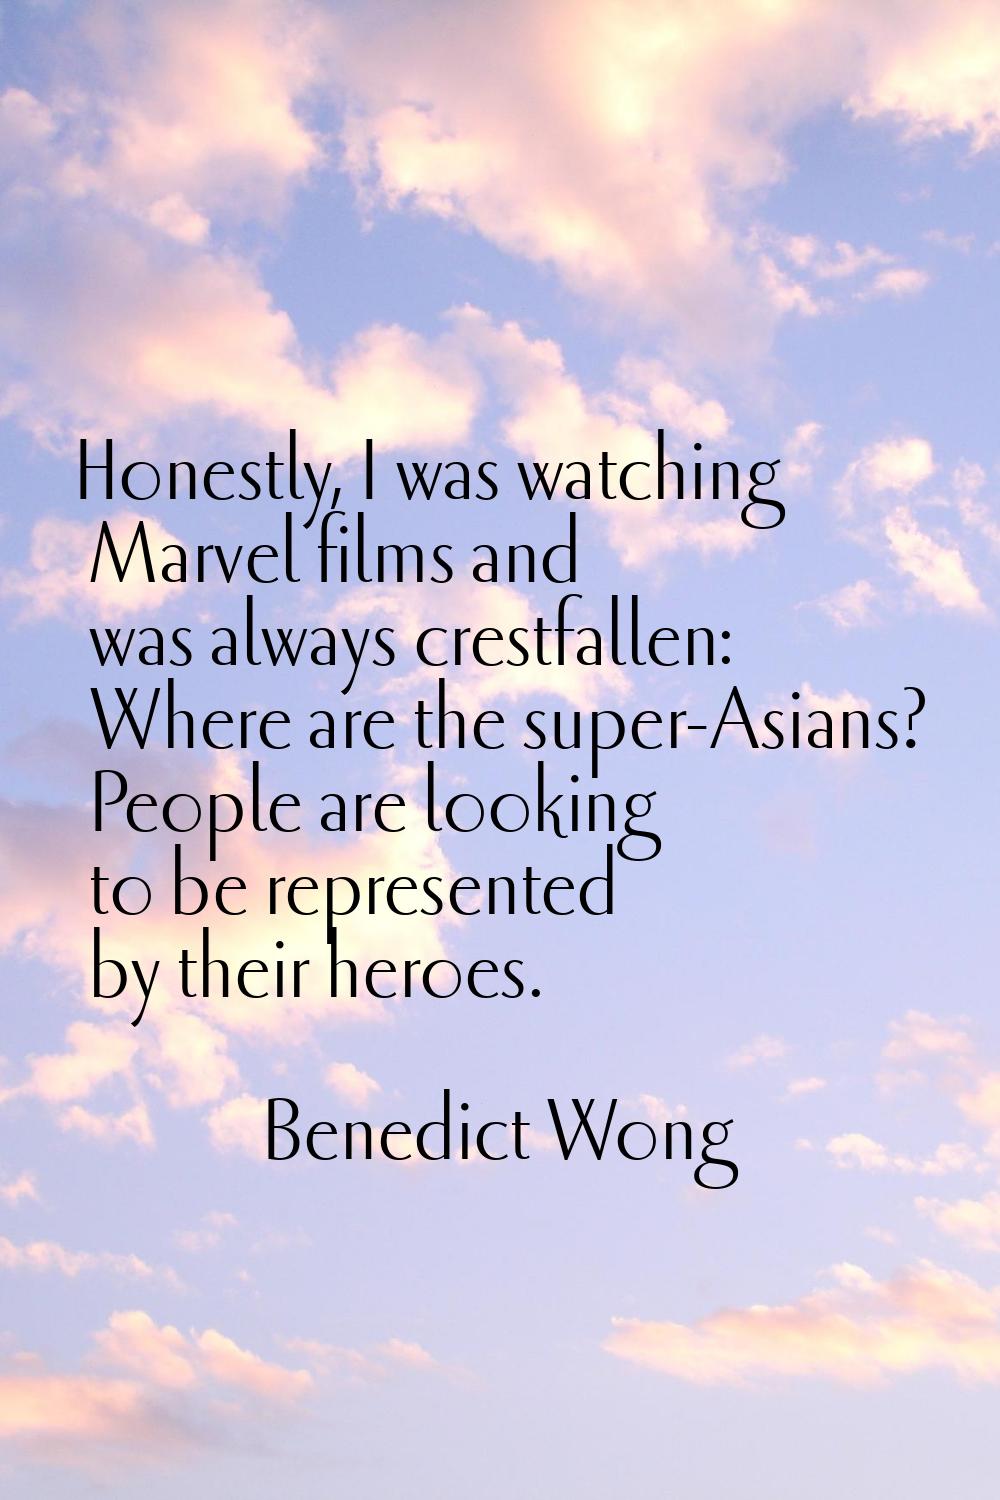 Honestly, I was watching Marvel films and was always crestfallen: Where are the super-Asians? Peopl